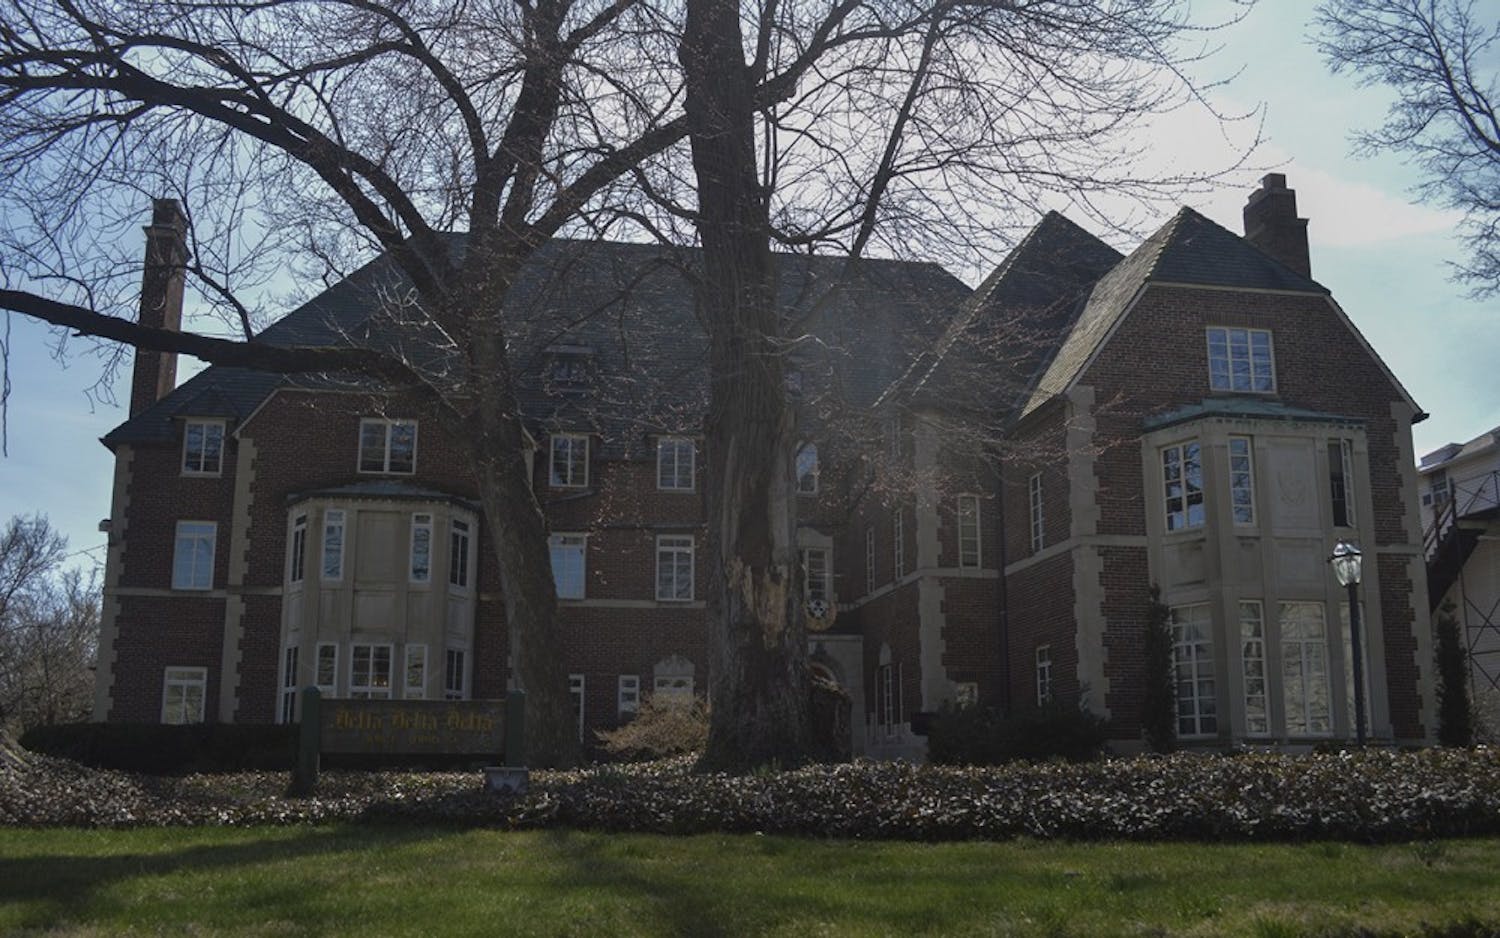 The Delta Delta Delta house sits on Third Street. The&nbsp;IU Delta Omicron chapter of Delta Delta Delta was revoked Saturday after the groups's national organization said the IU members' activities clashed with Tri Delt's high standards and purpose.